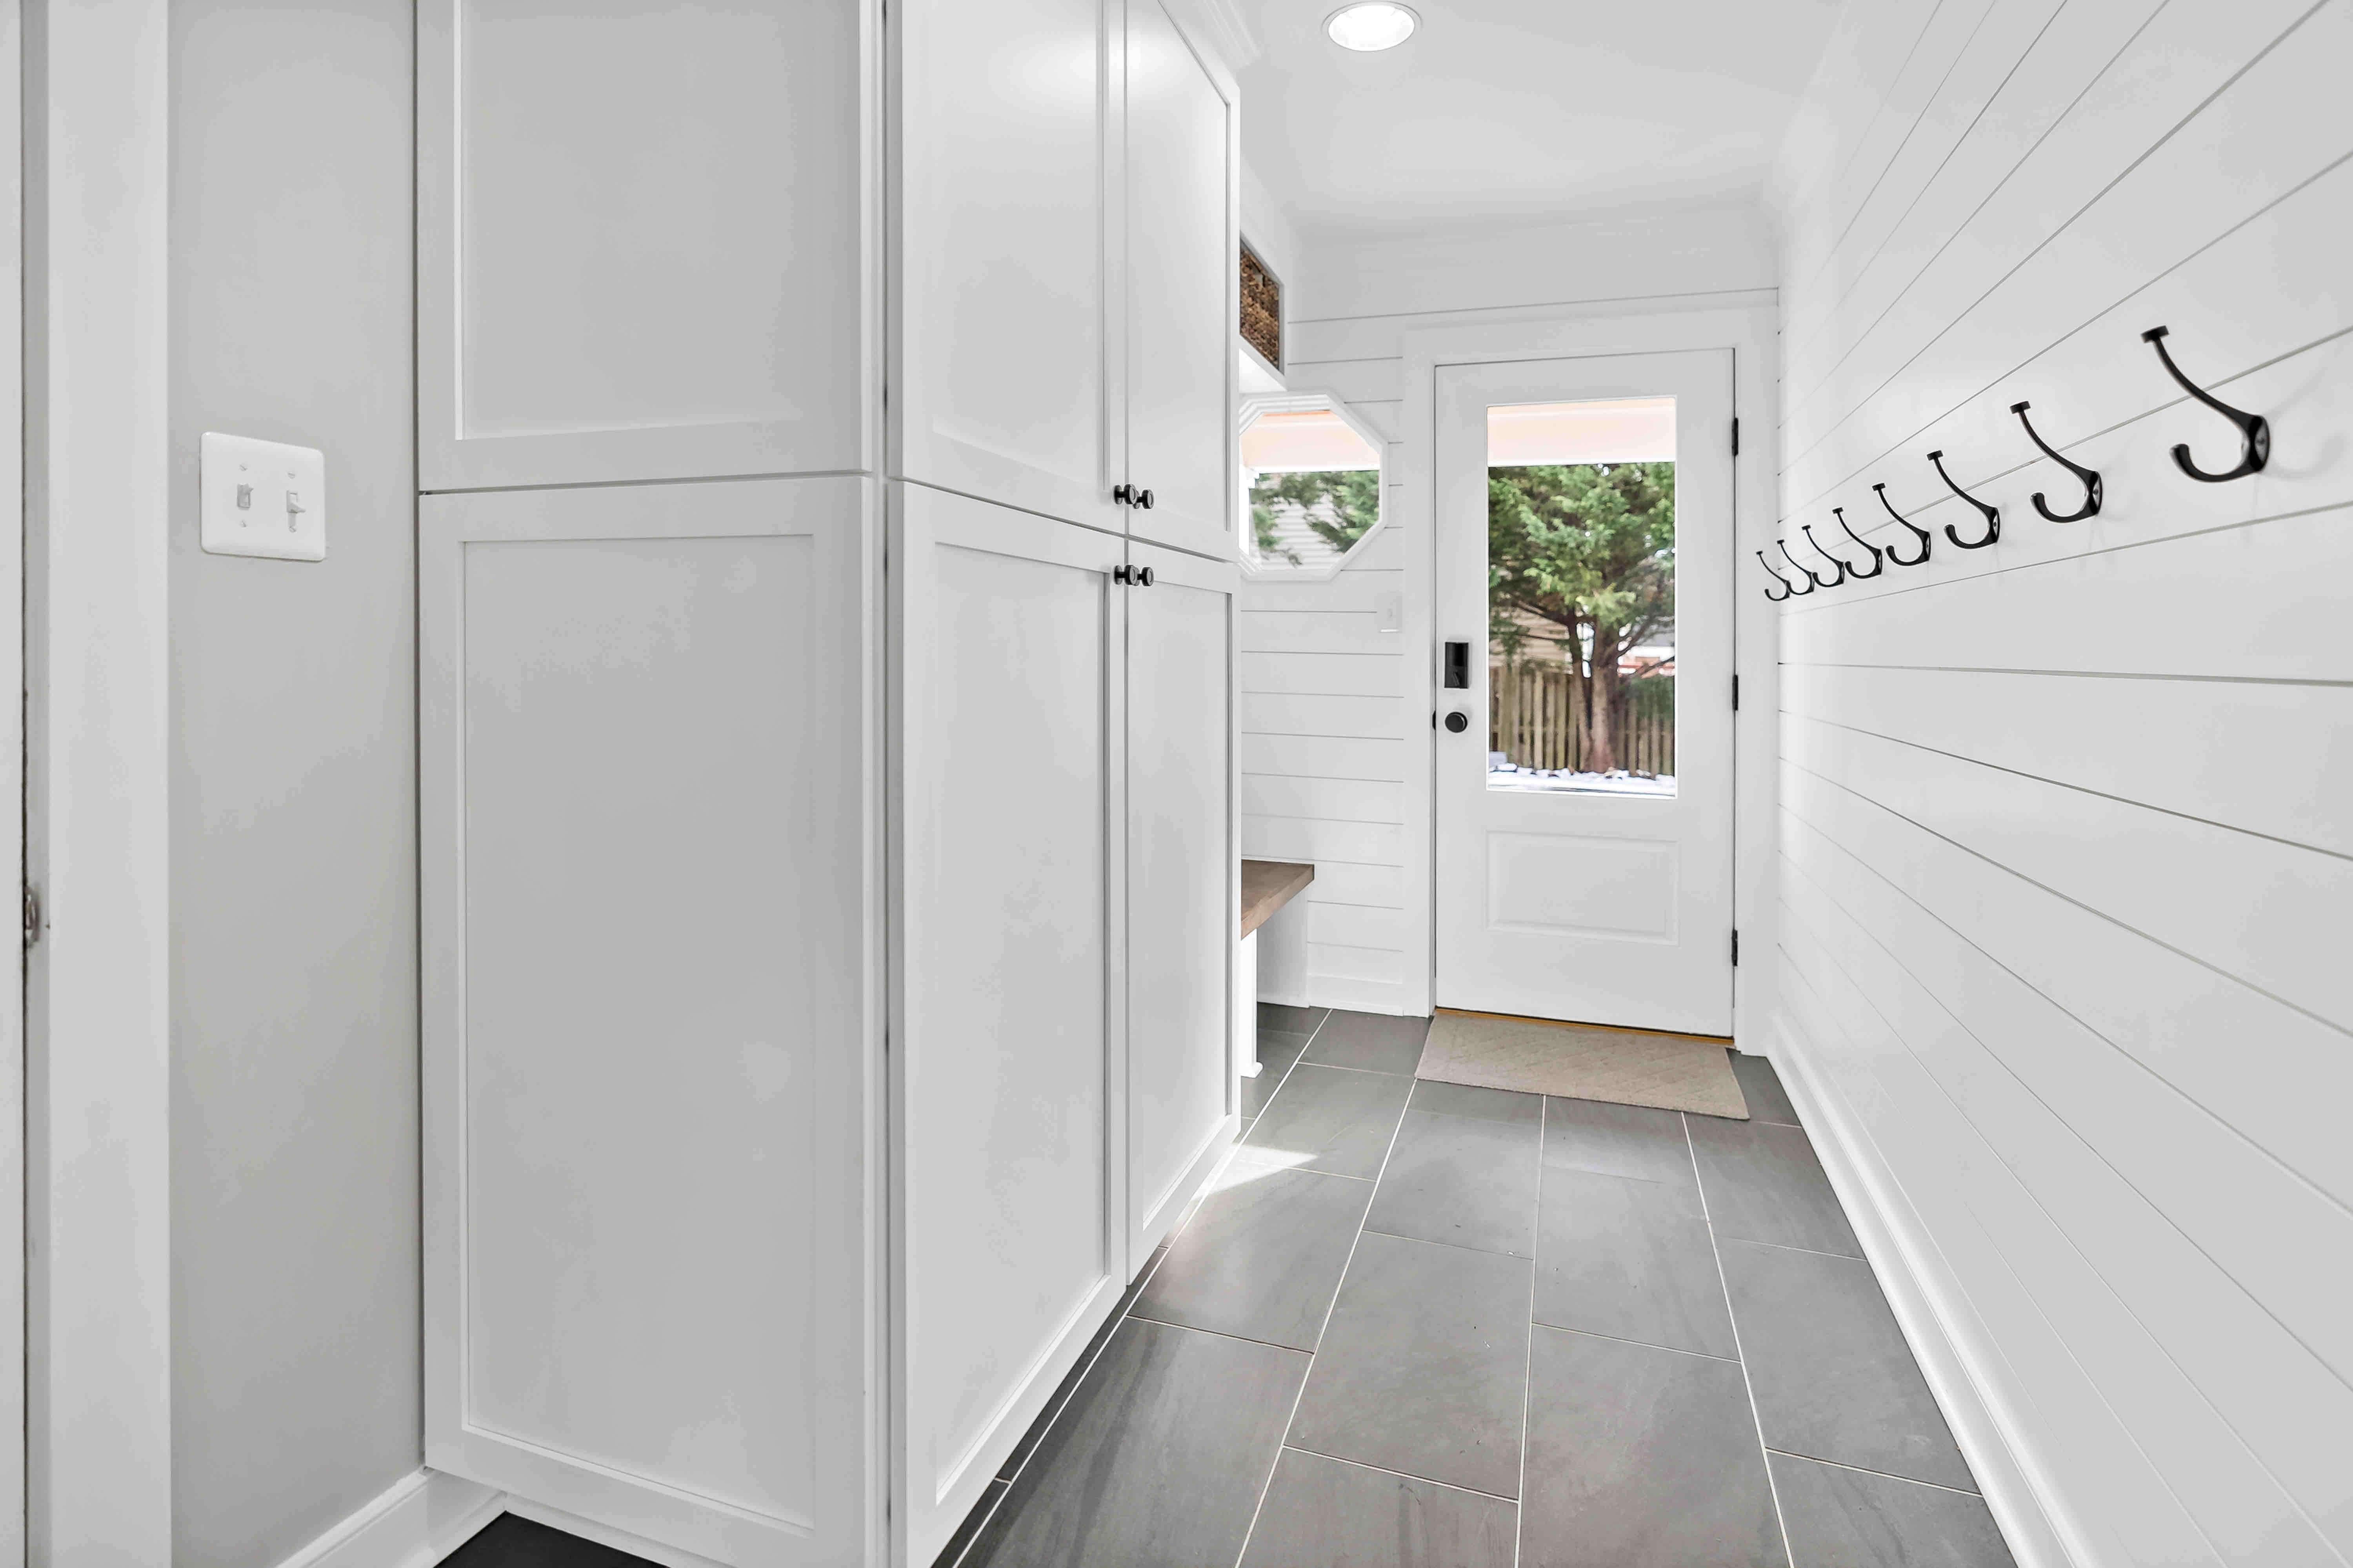 Mudroom at entrance of house with dark grey tile